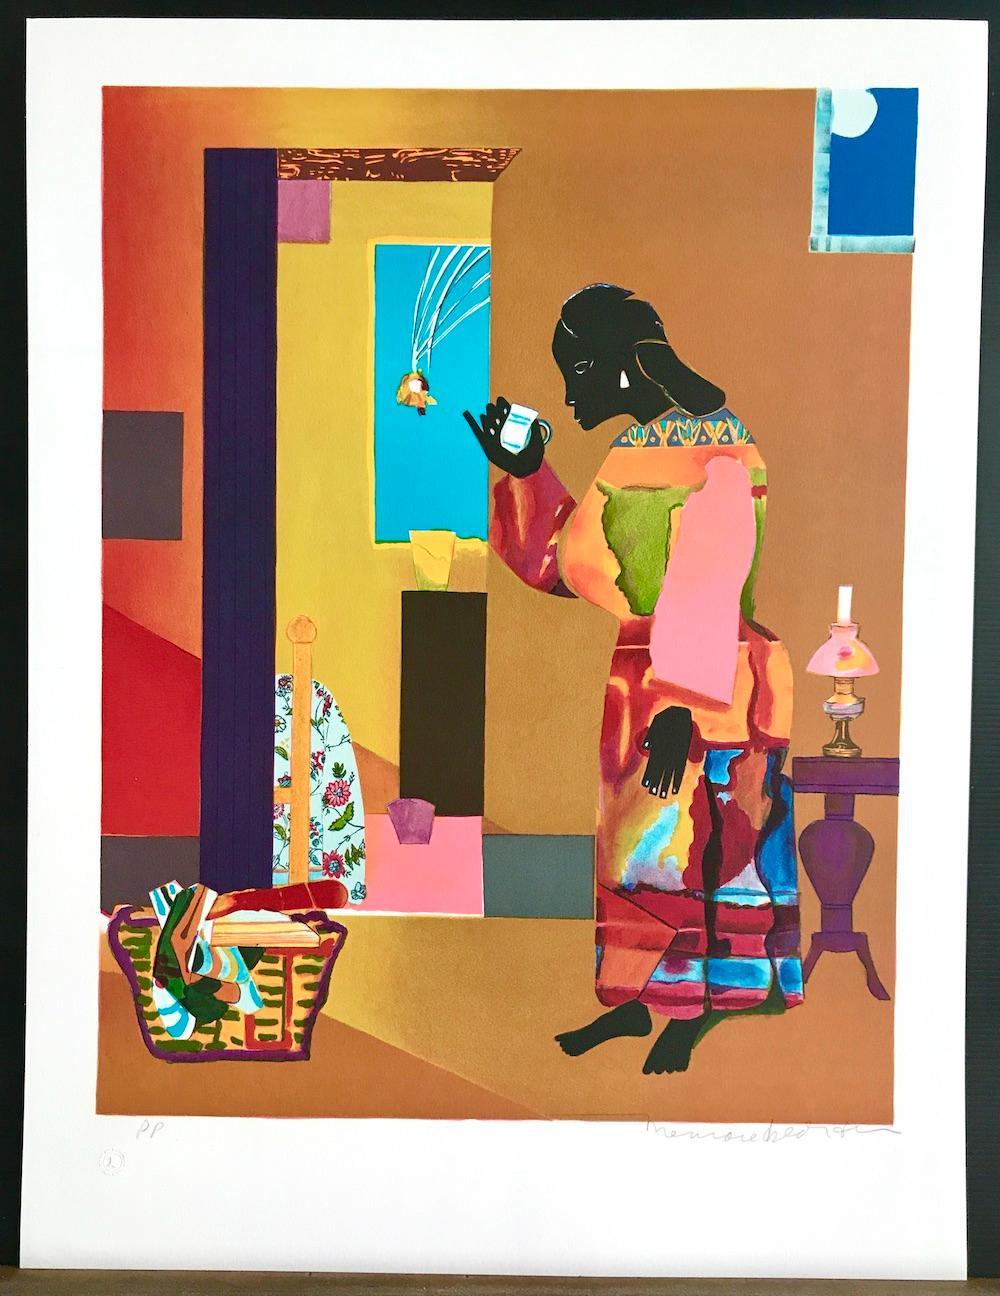 FALLING STAR Signed Lithograph Black Woman Portrait, African American Culture - Contemporary Print by Romare Bearden